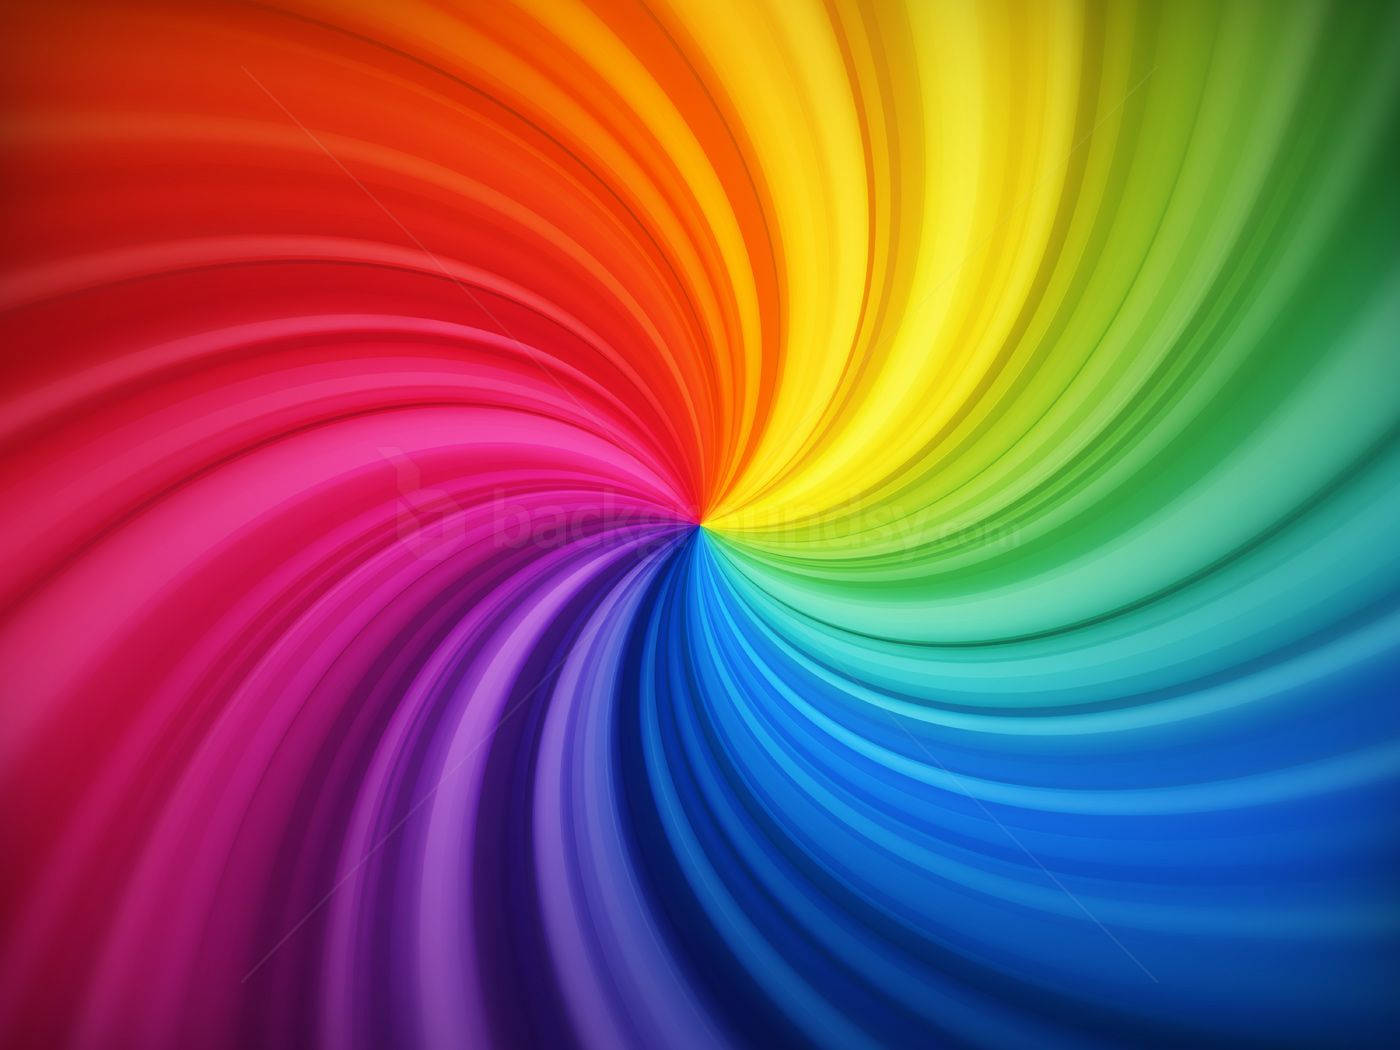 Free Rainbow Wallpaper Downloads, [600+] Rainbow Wallpapers for FREE |  